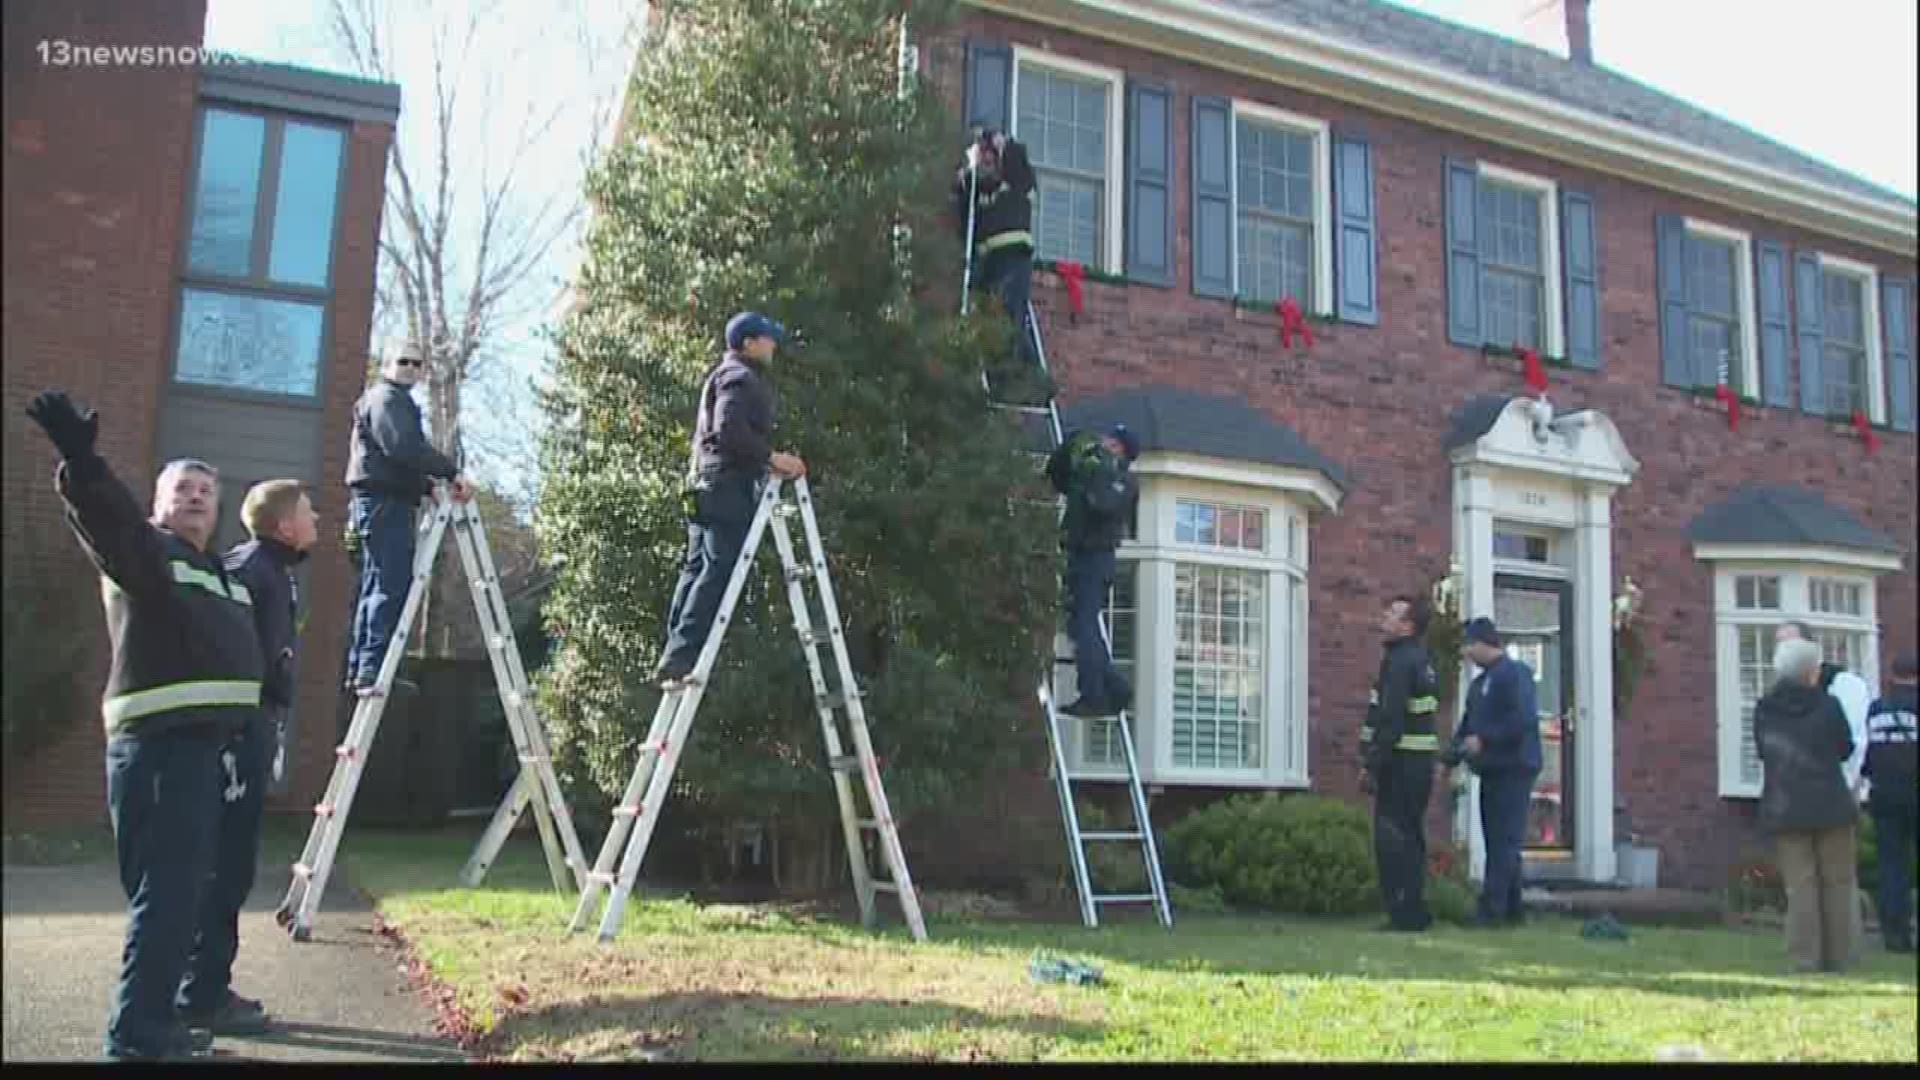 After a homeowner fell off his ladder while hanging Christmas lights, the firefighters who responded to the scene returned to finish the job.